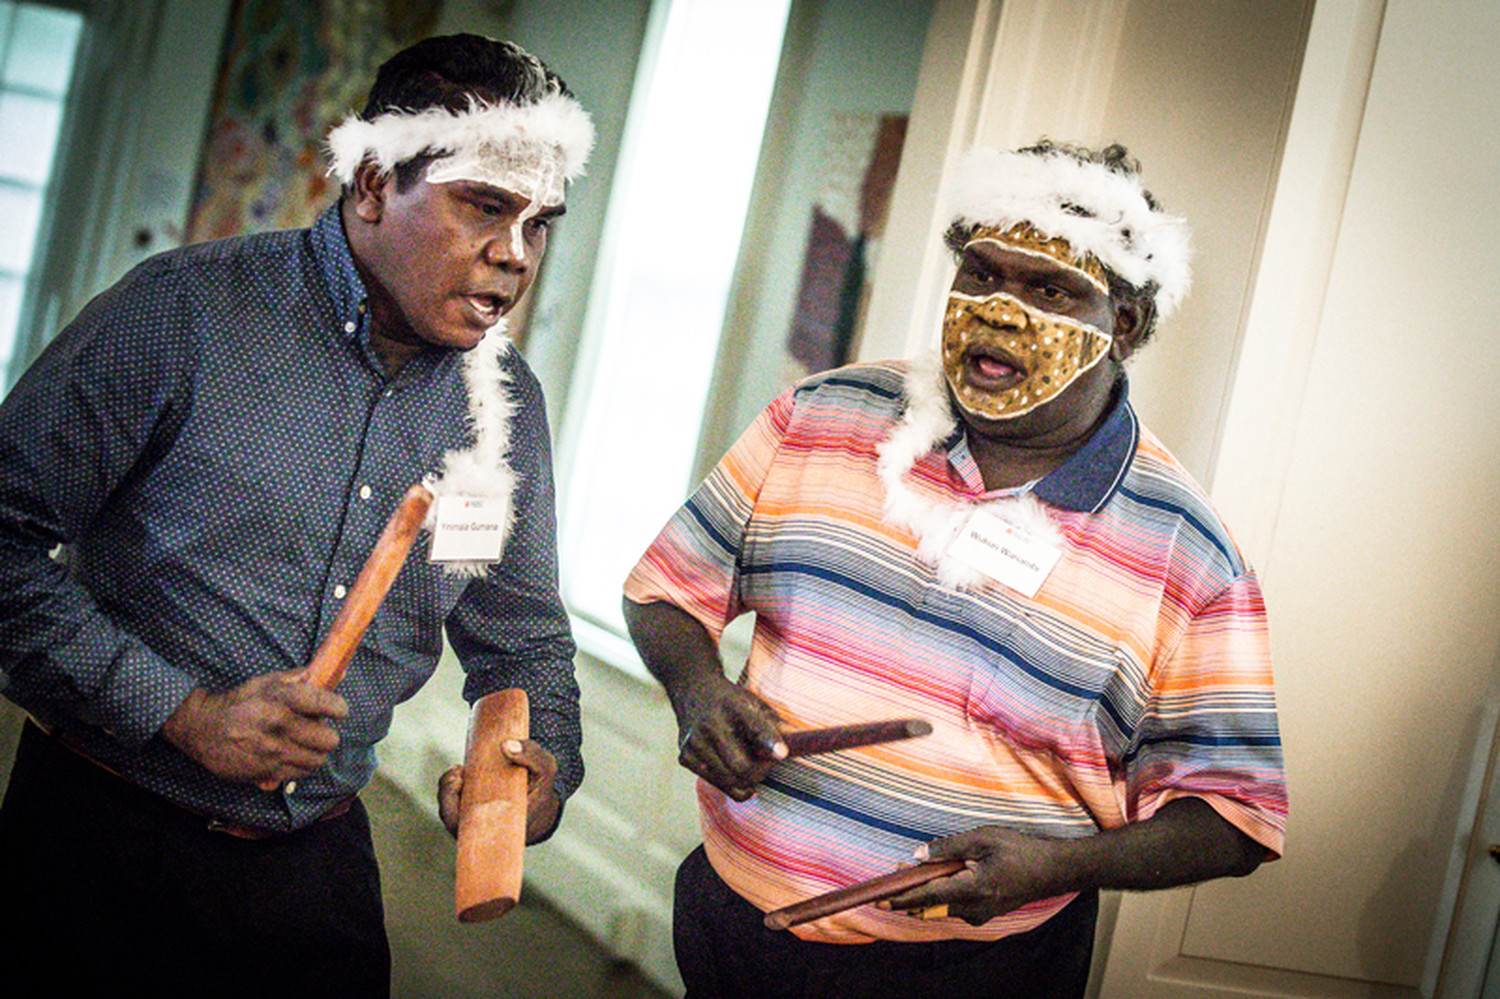 Yinimala Gumana and Wukun Wanambi, Yolngu artists from Yirrkala, Northern Territory, Australia, perform traditional Yolngu songs during a special event at Kluge-Ruhe in September 2017.